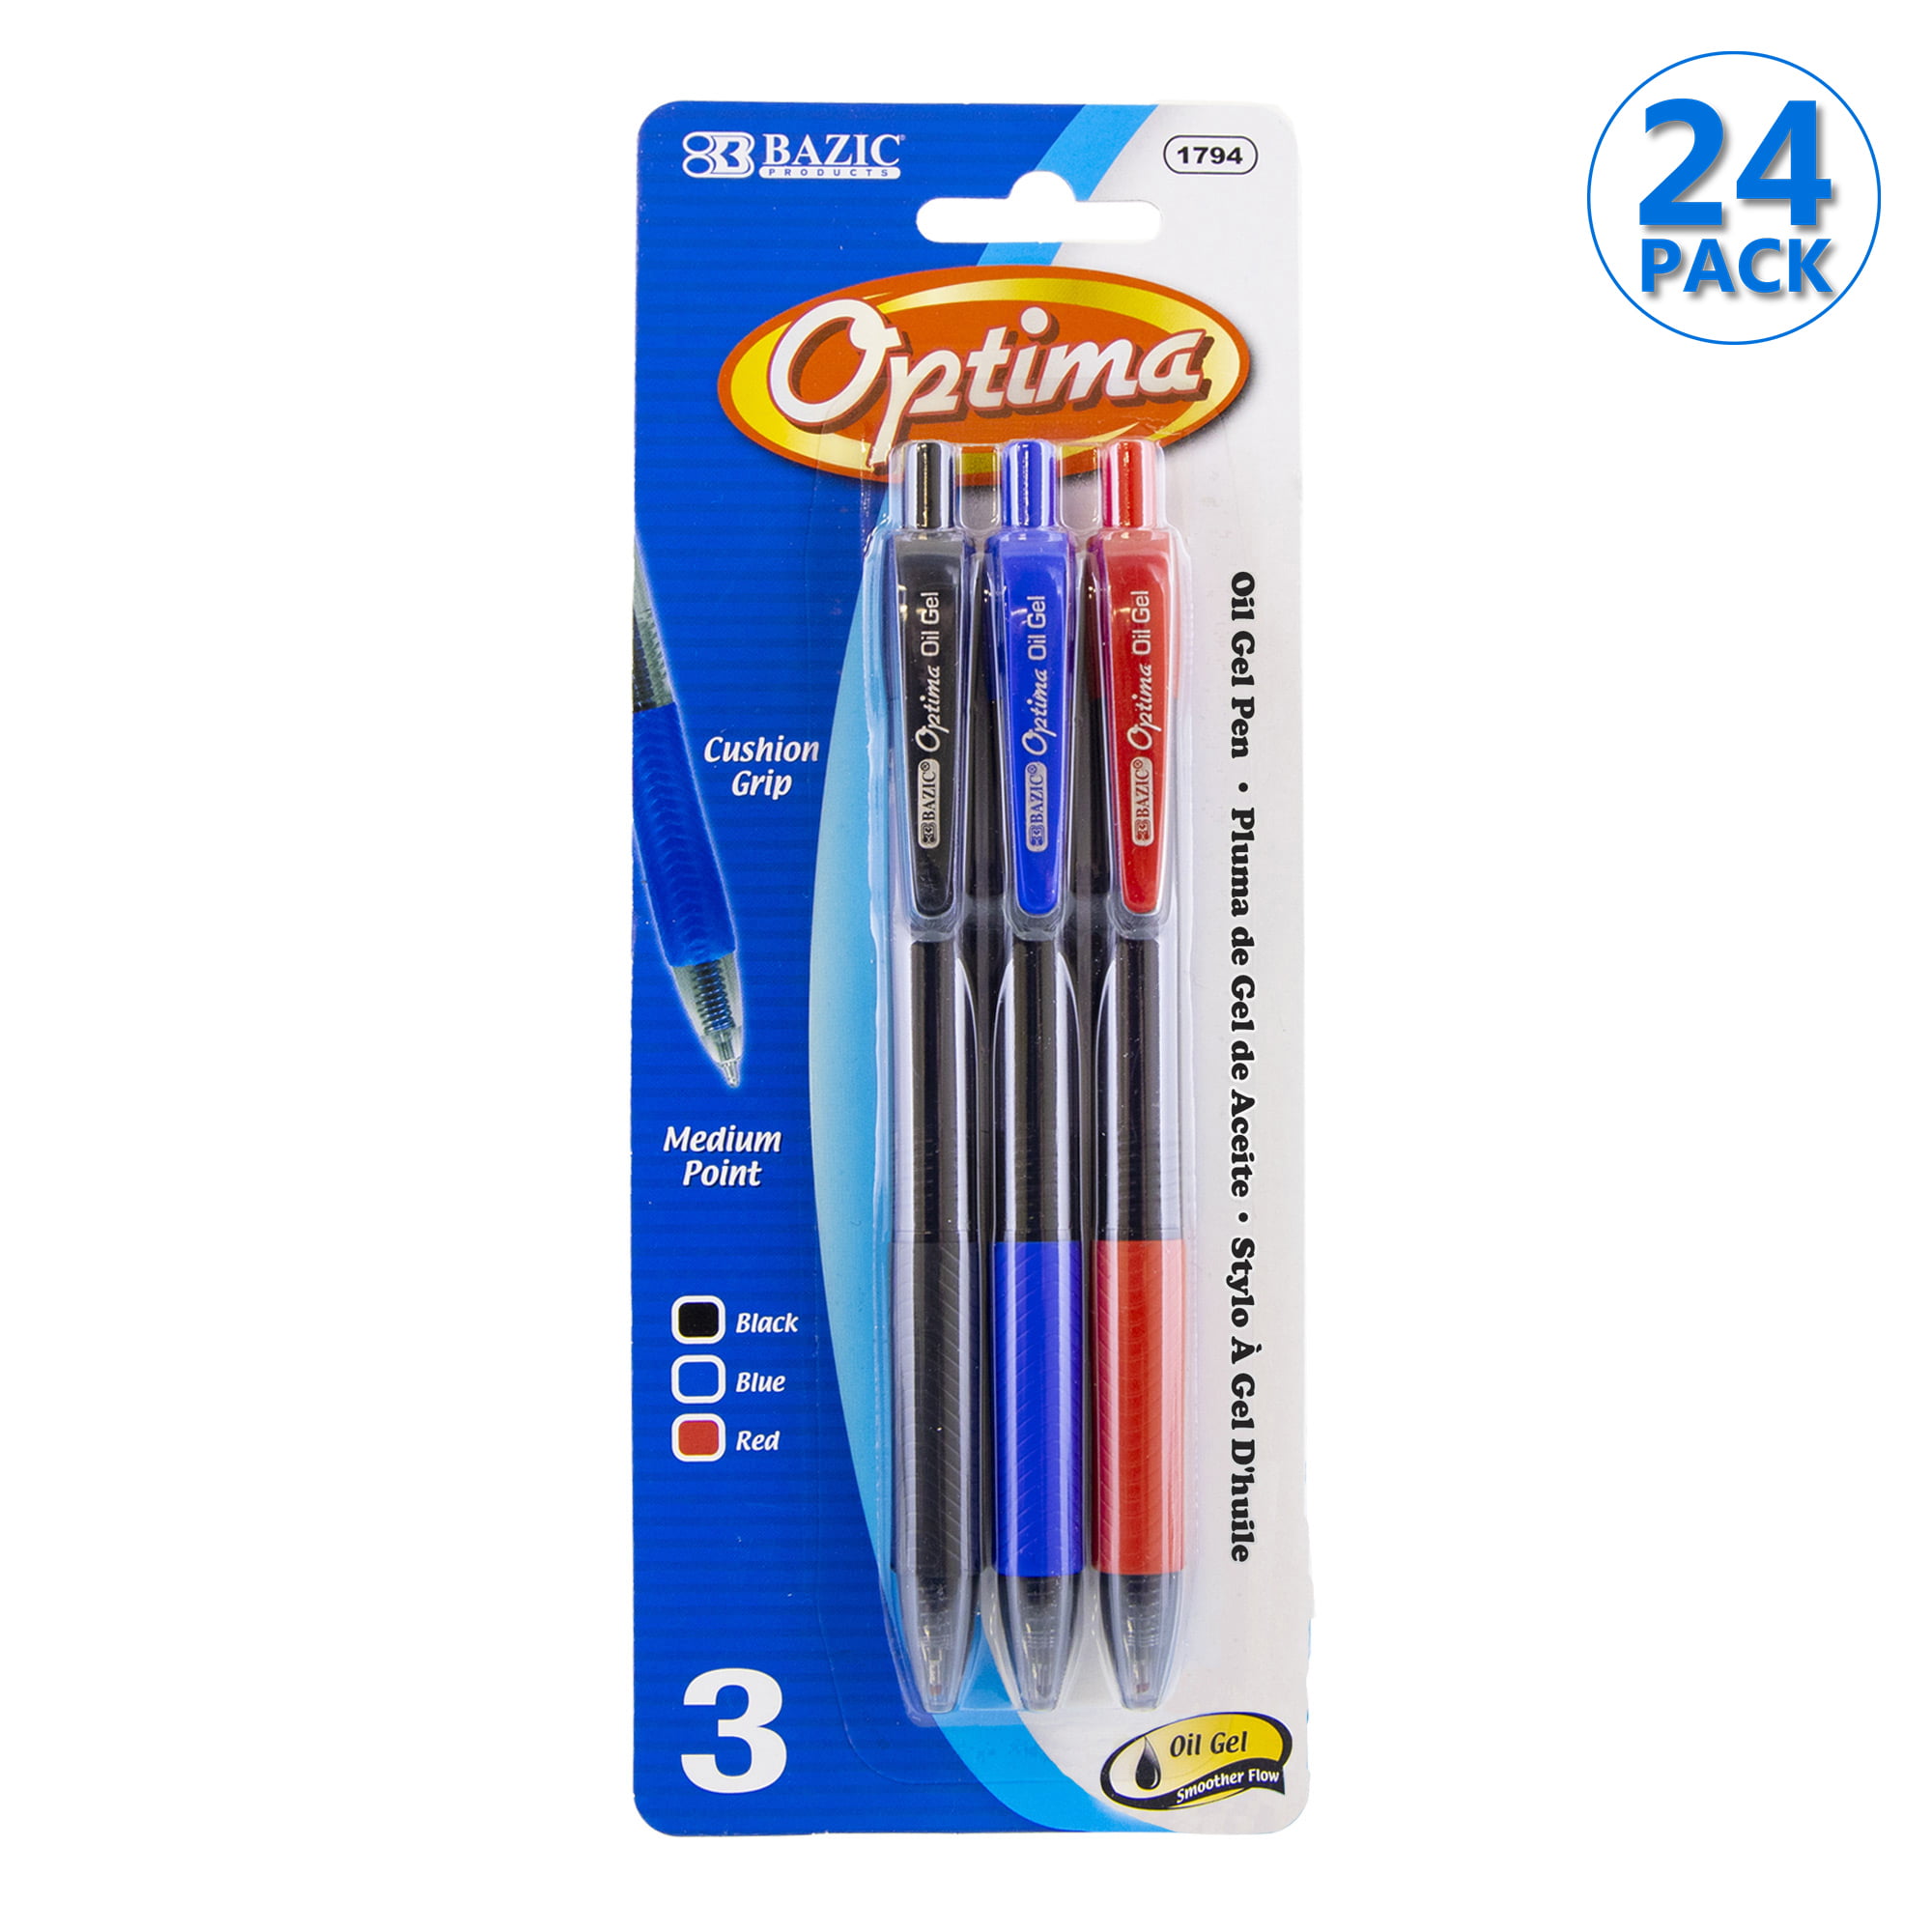  Linc Offix Smooth Ball Point Pen, 1.00mm Tip, 9-Count,  Assorted Colors : Office Products